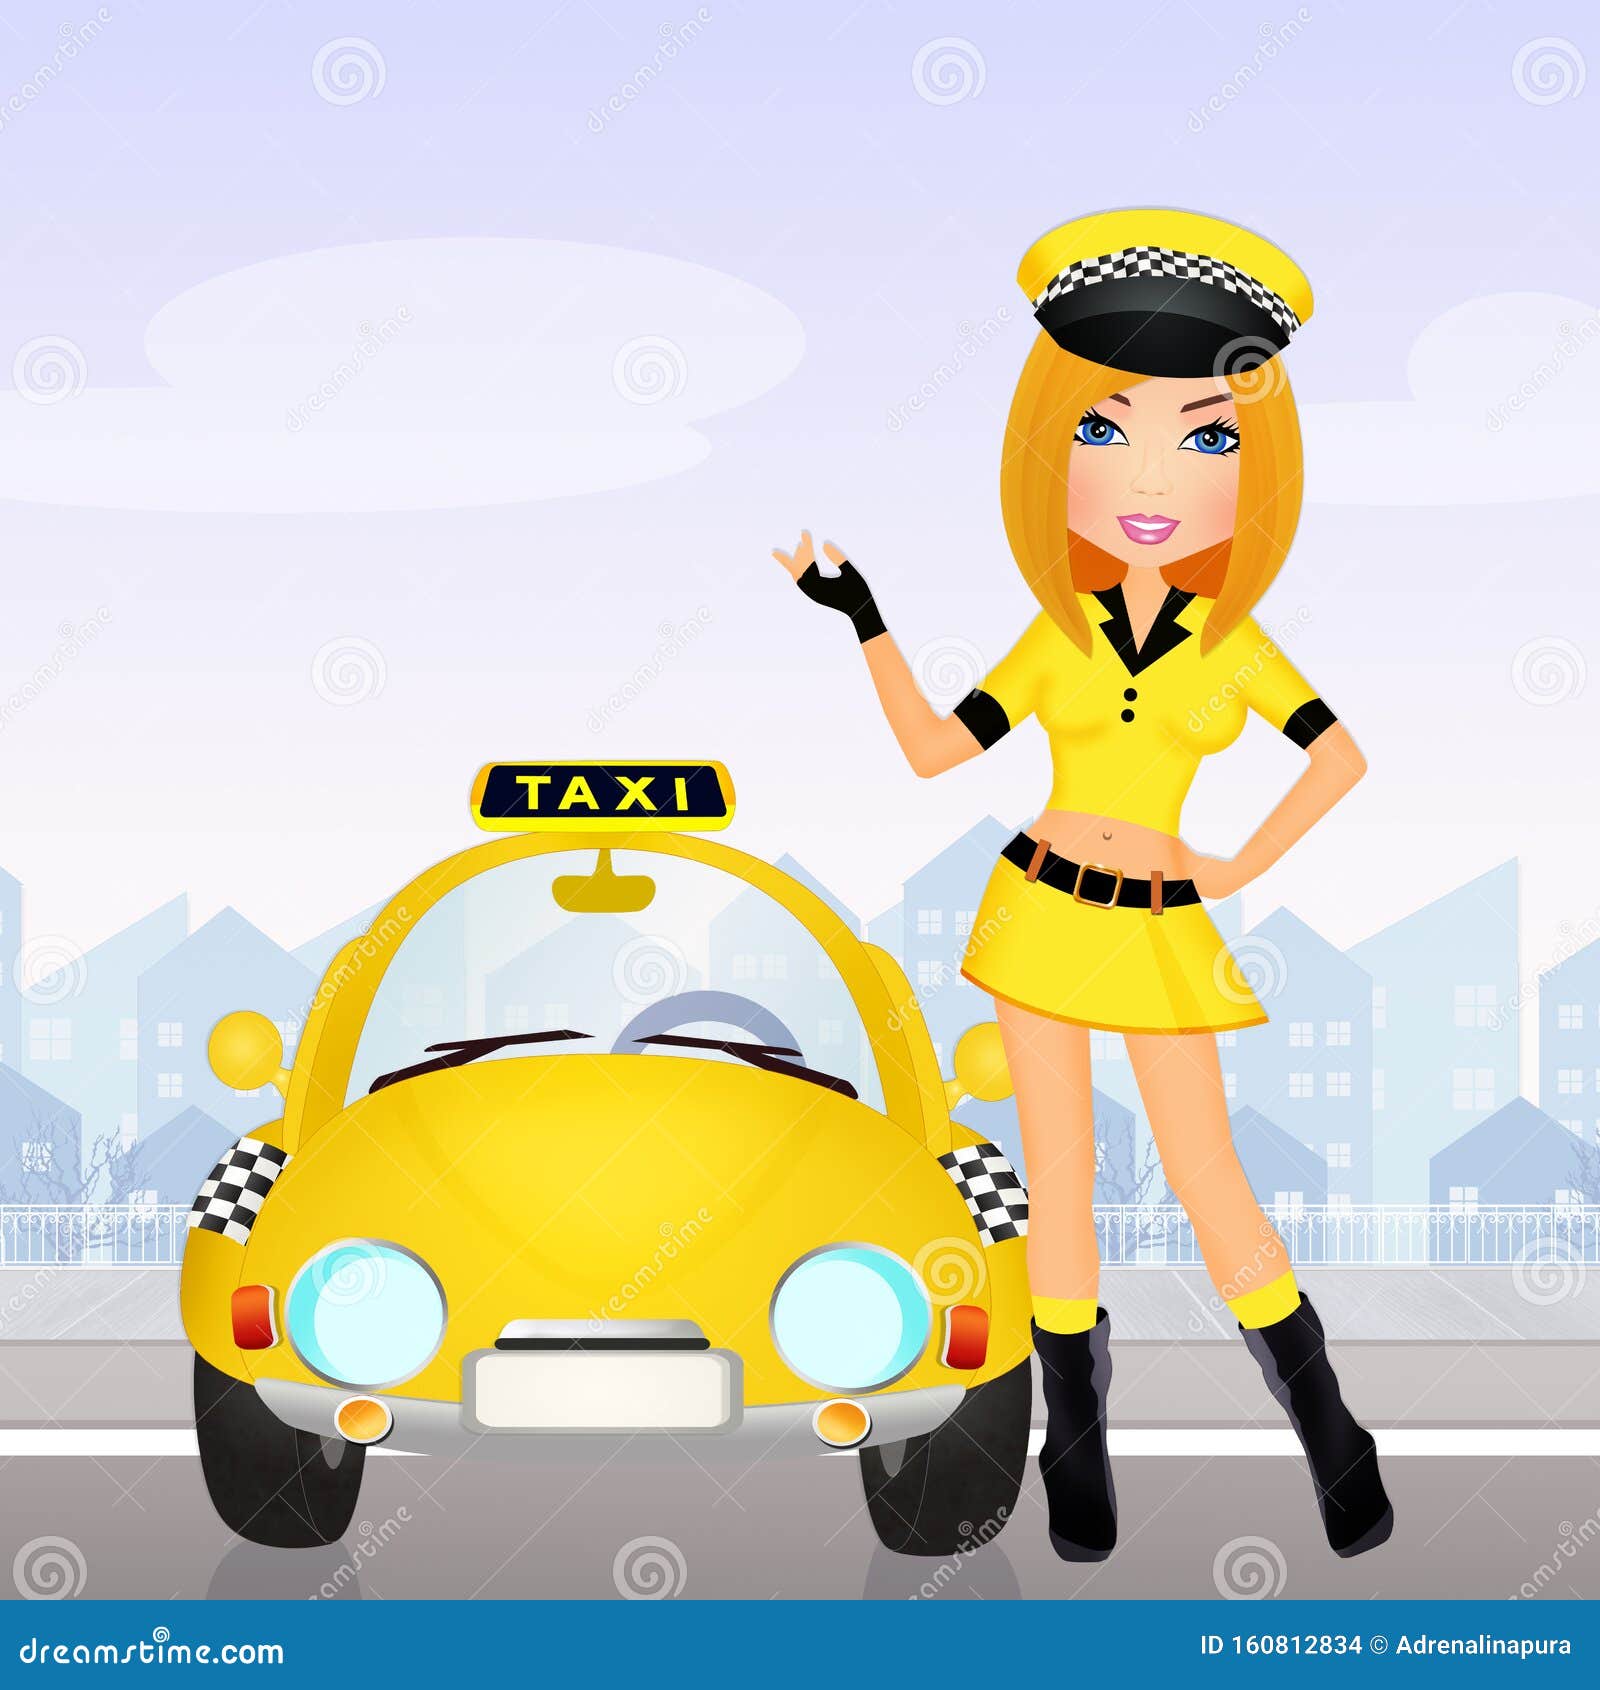 Girl Taxi driver stock illustration. Illustration of employment - 160812834